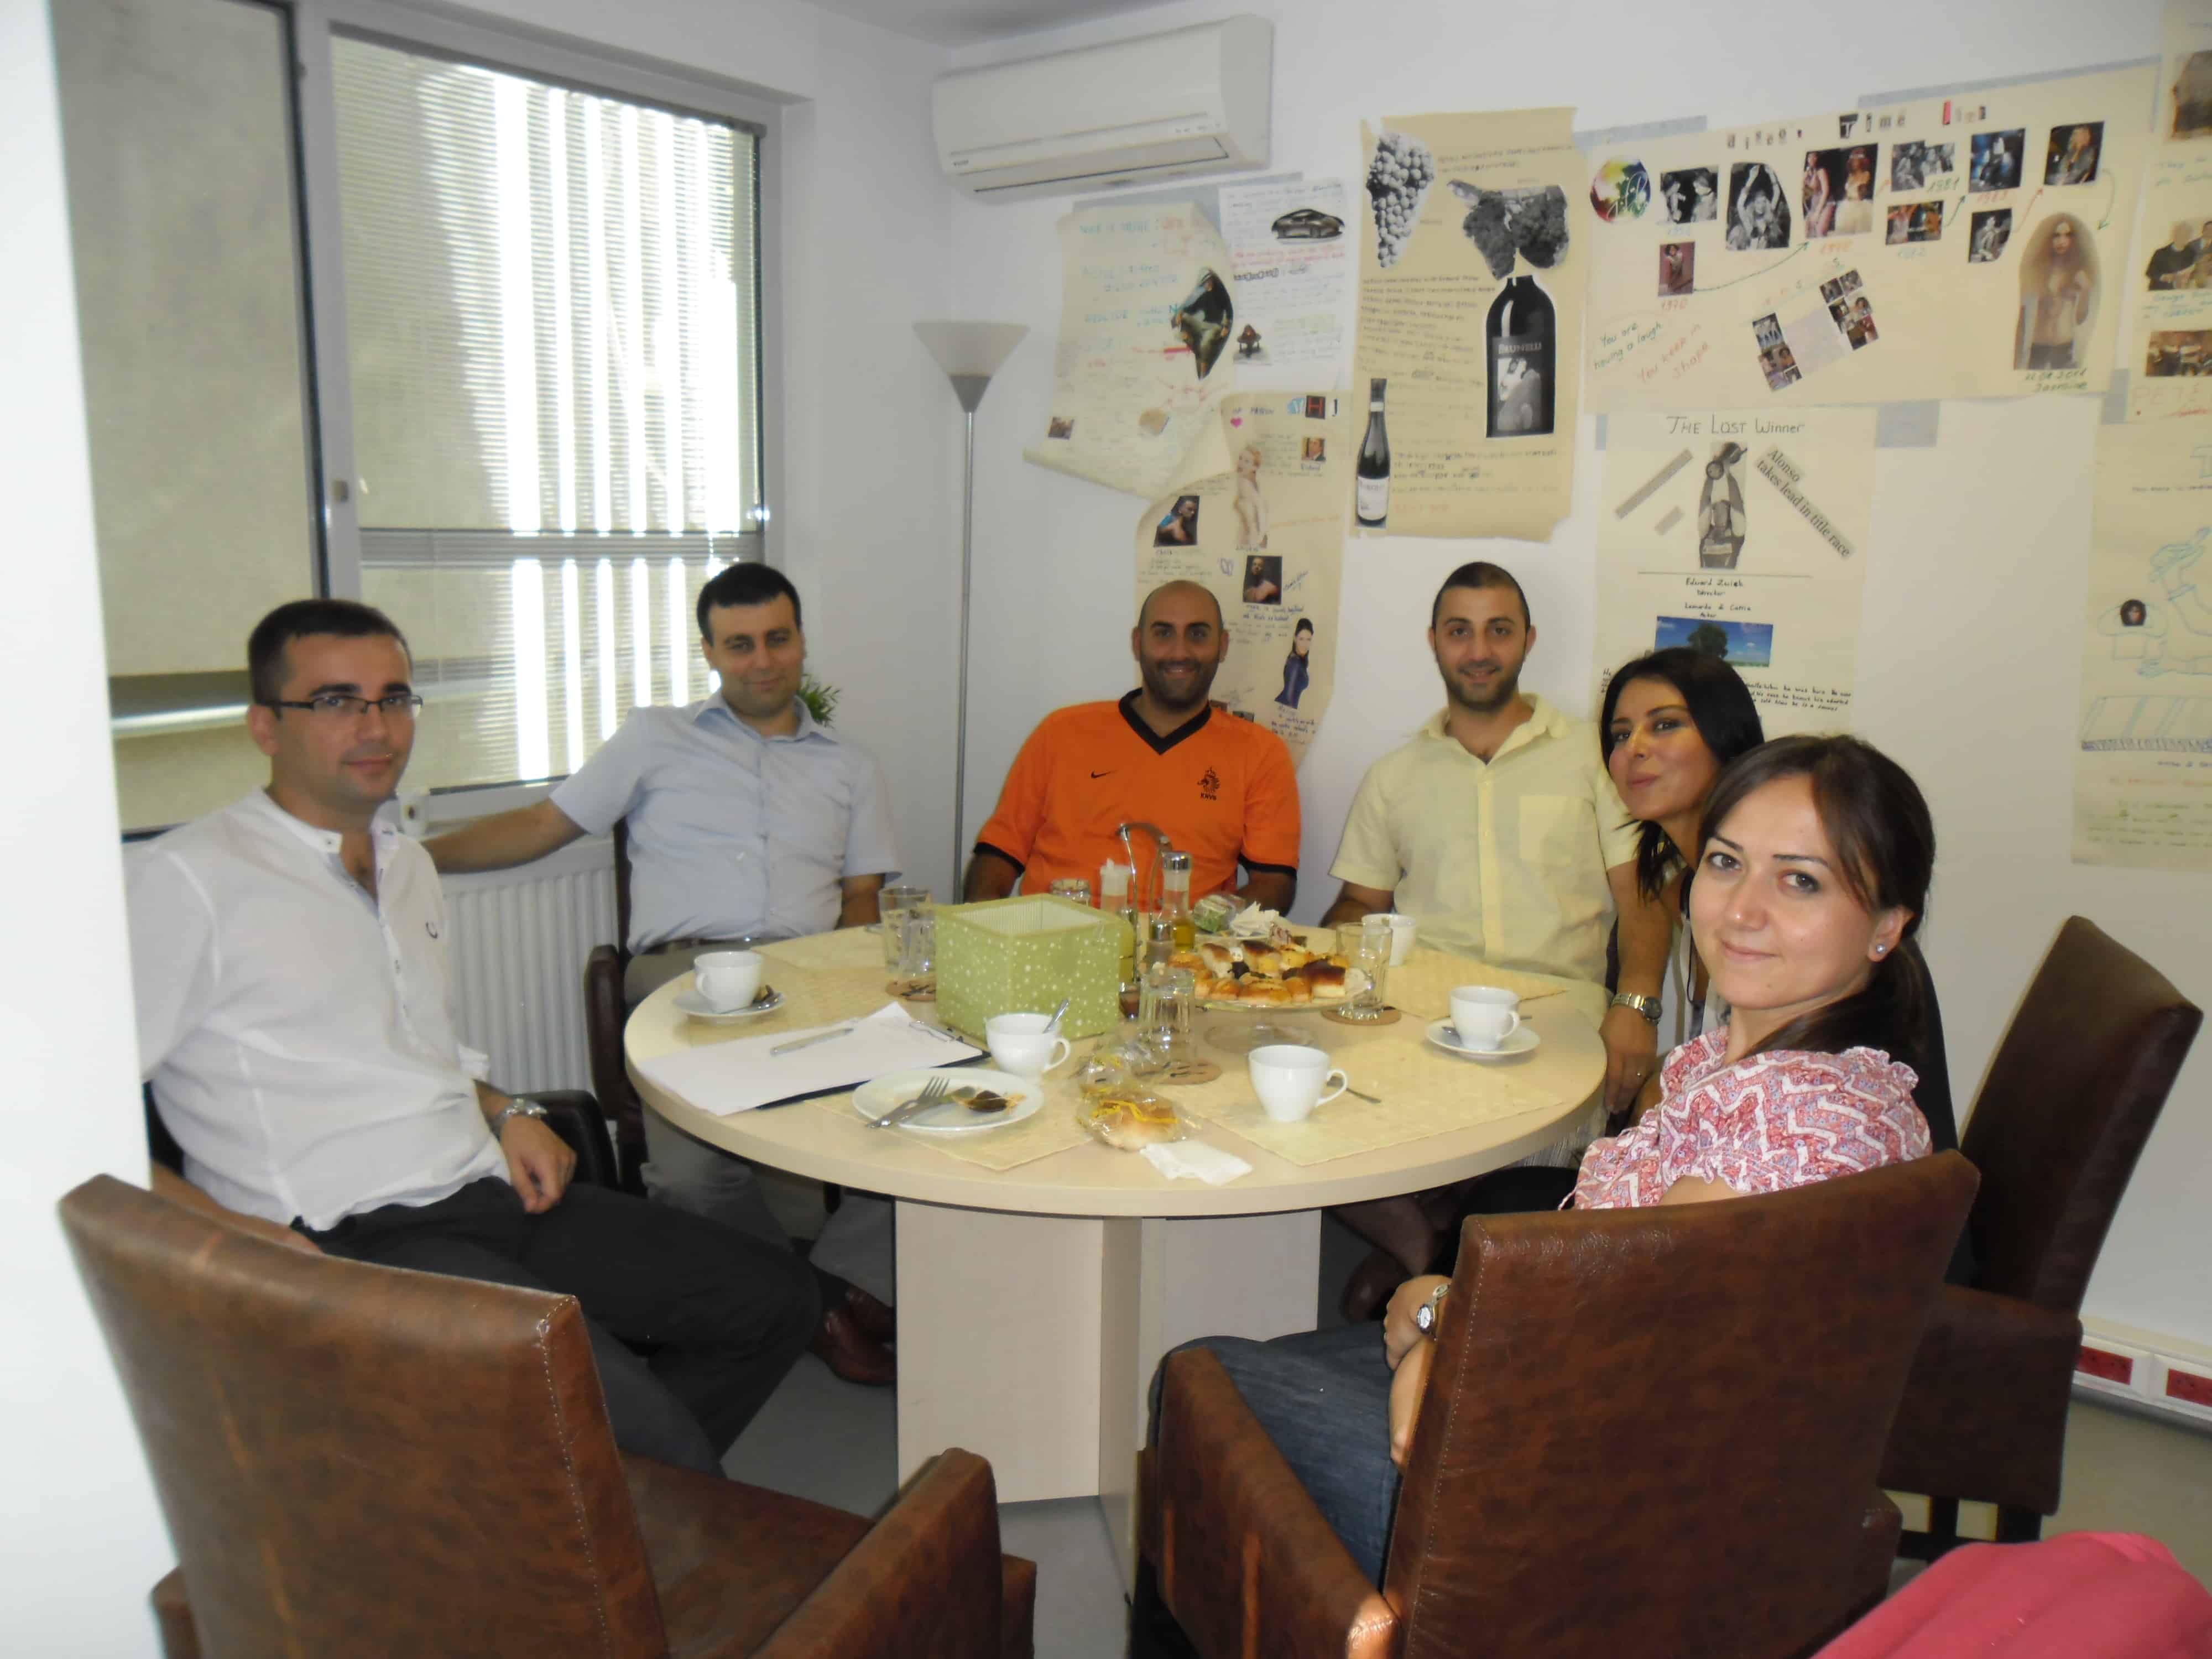 An English class in September 2011 in Istanbul, Turkey